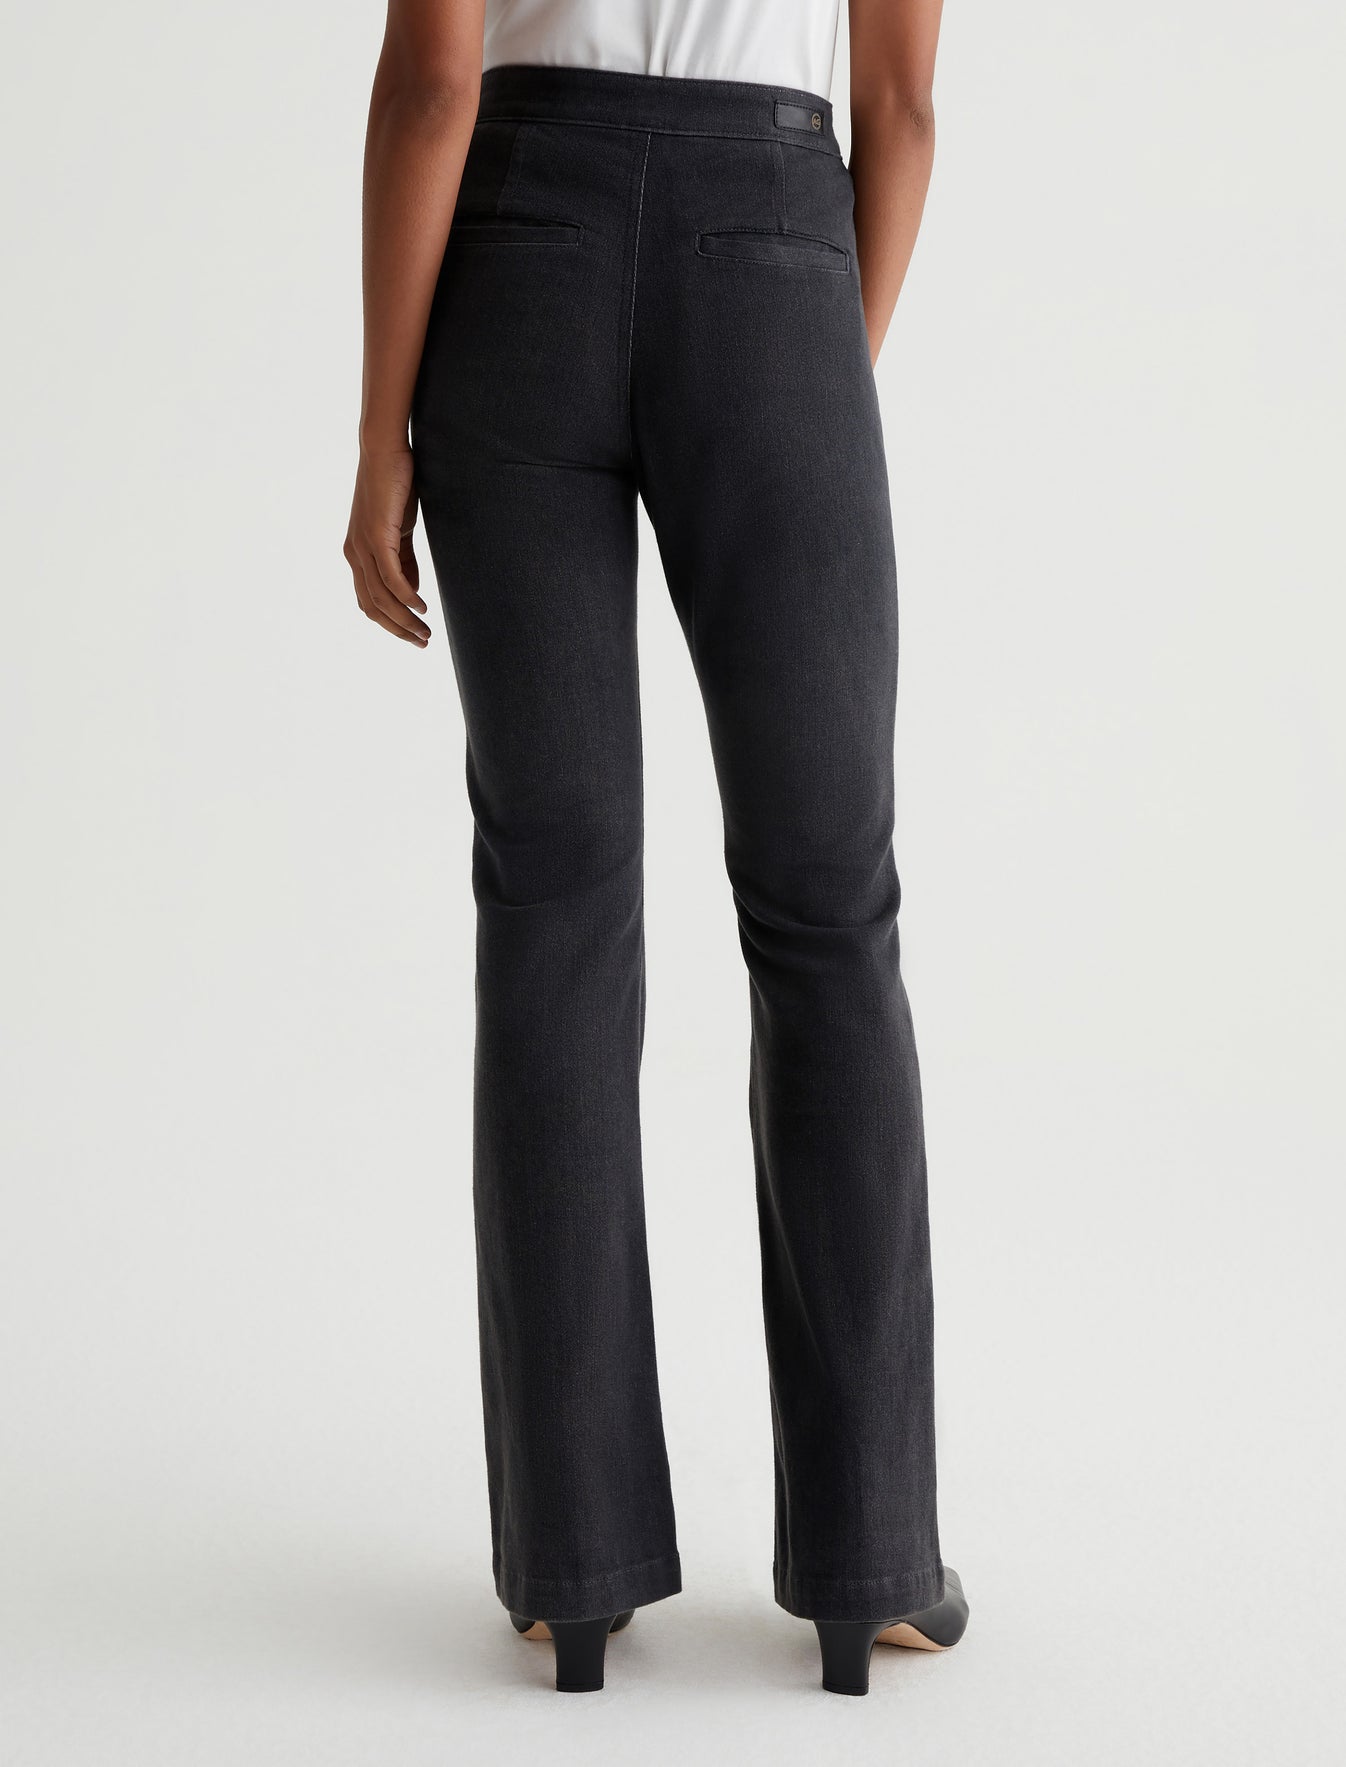 Women Tailored Anisten Charcoal Jeans at Official Stone Store AG